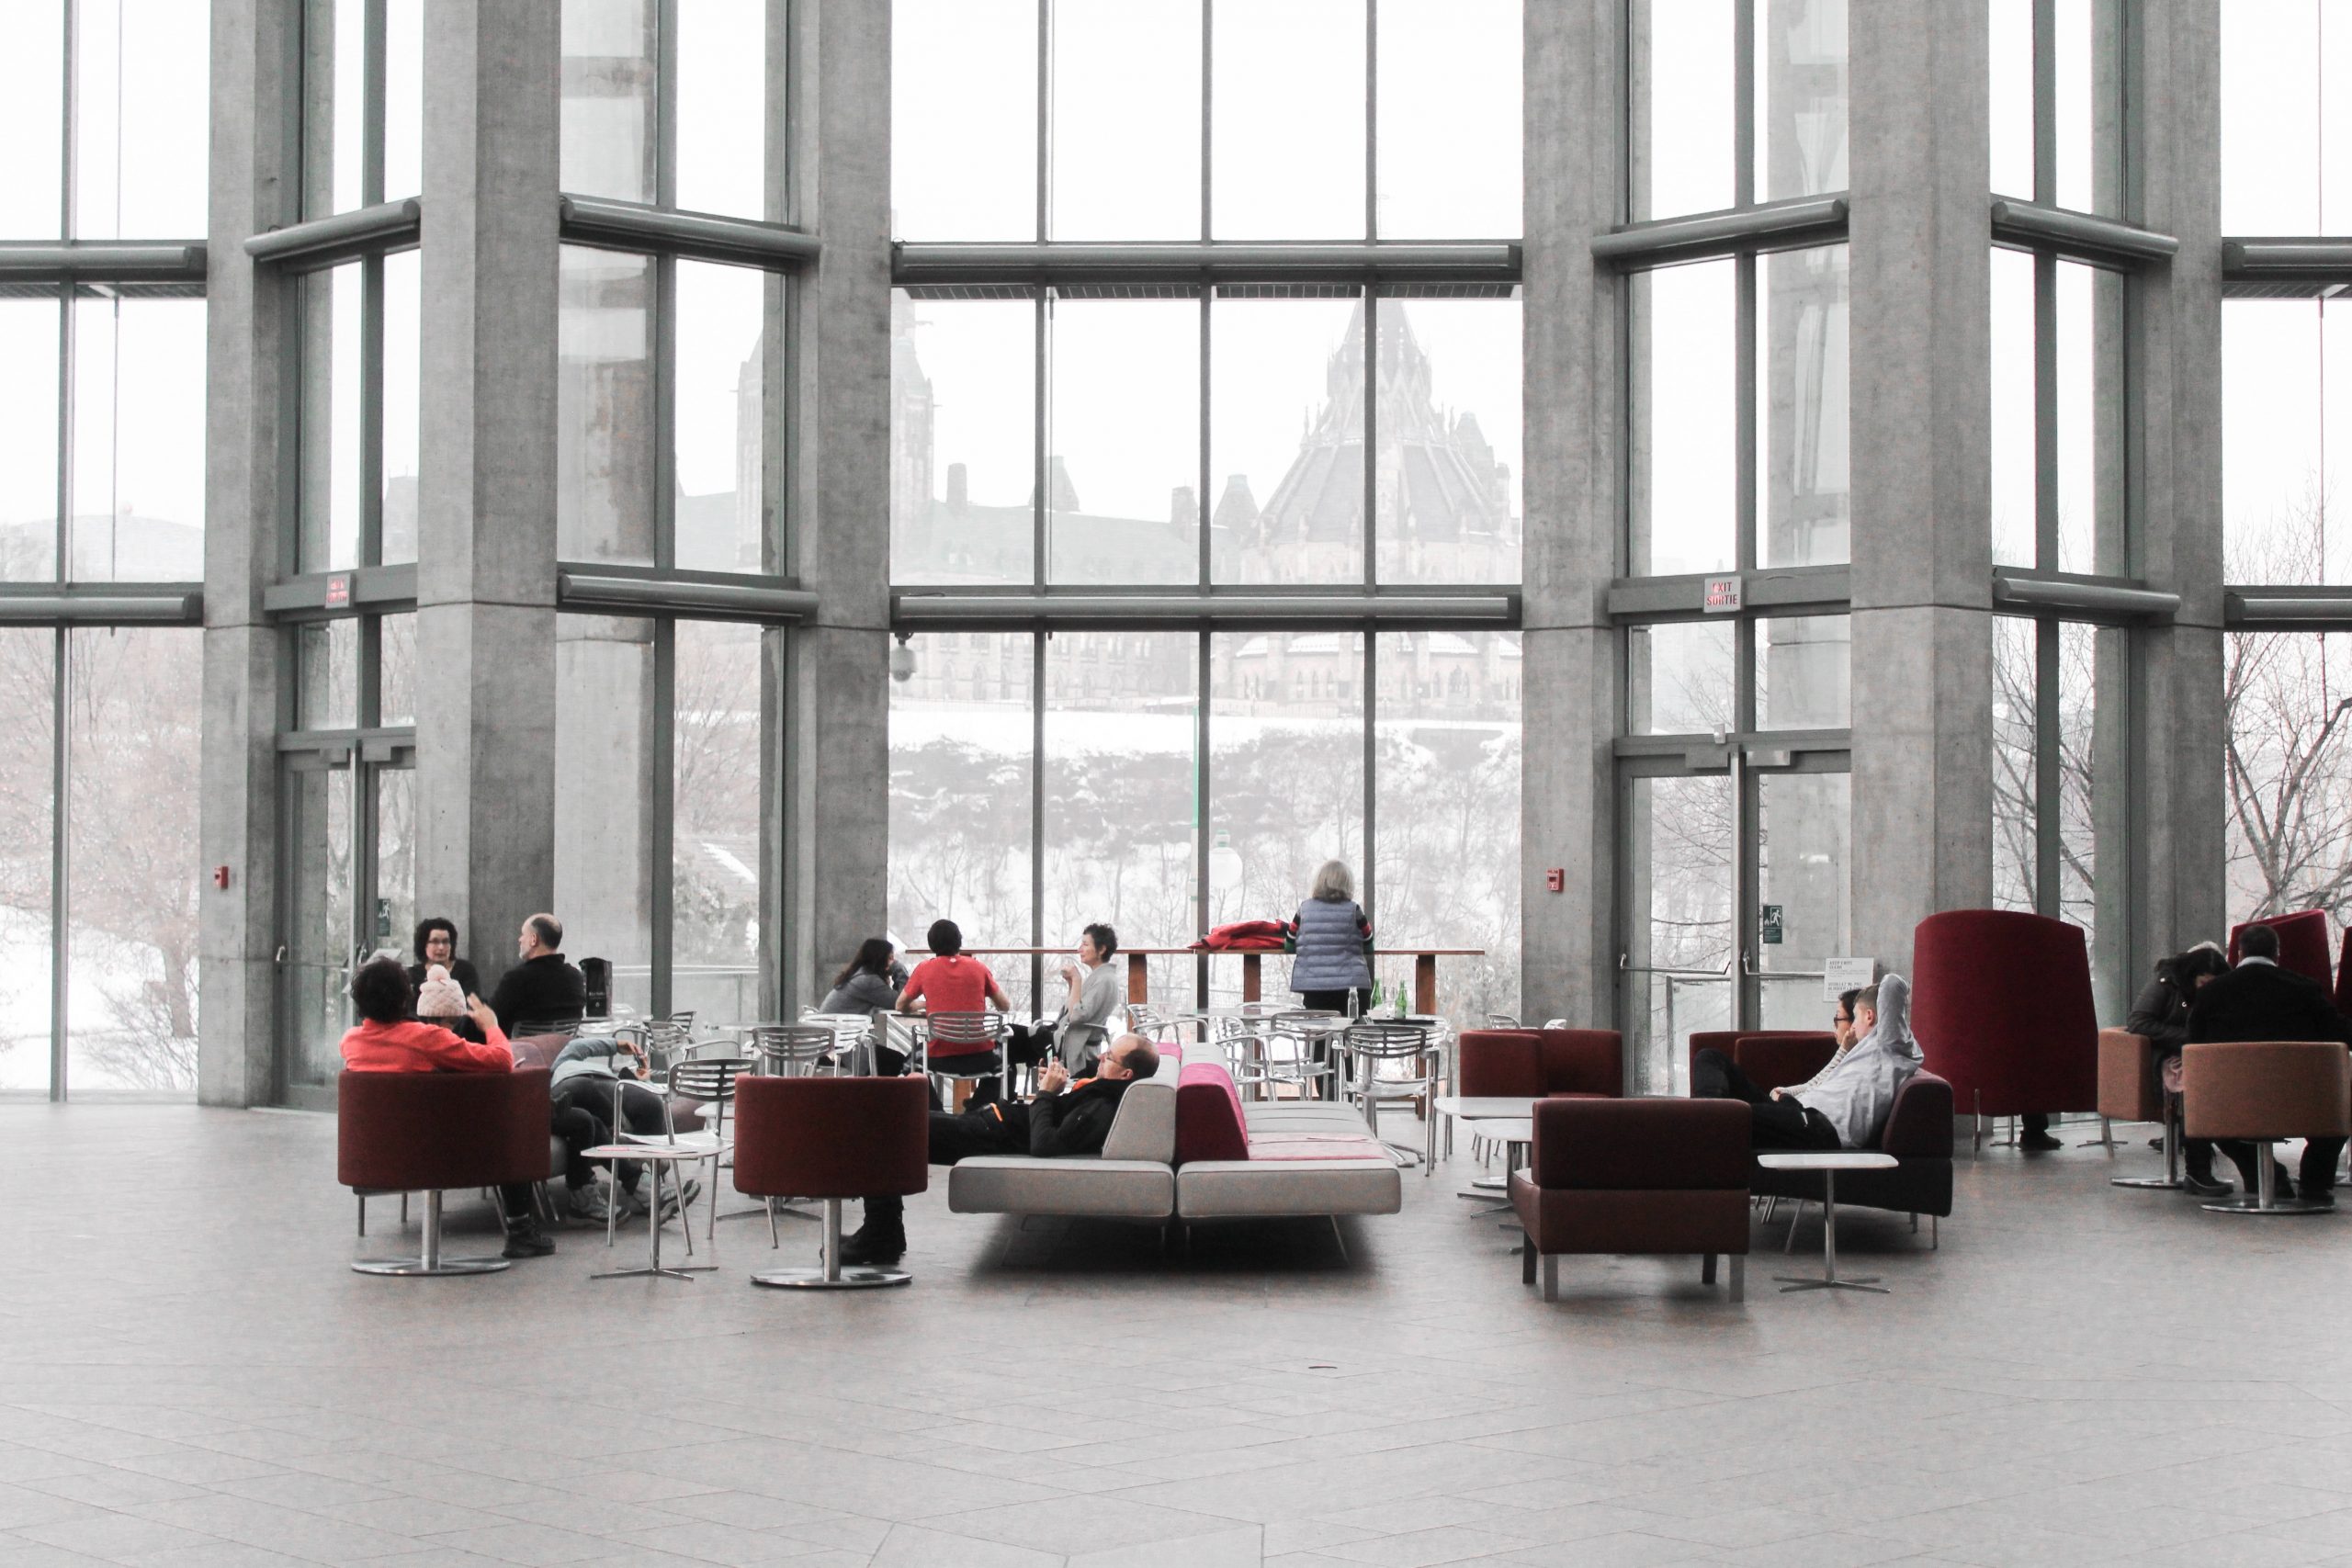 Photo of people sitting on various couches inside of a building with large windows overlooking the snow outside.